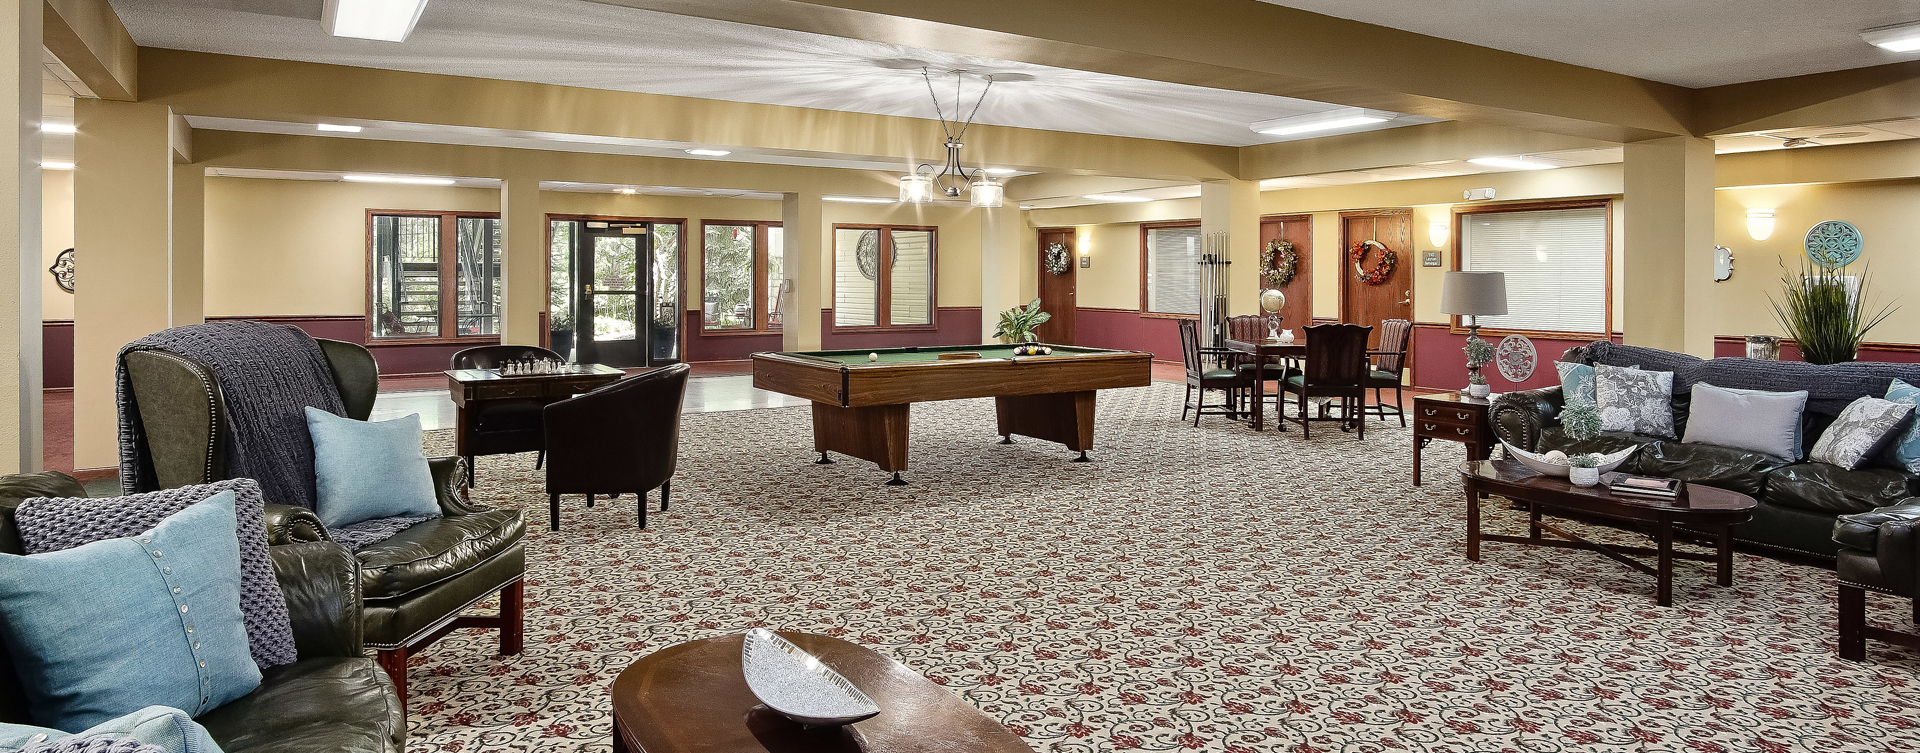 Enjoy a game of pool with friends at Bickford of Raytown